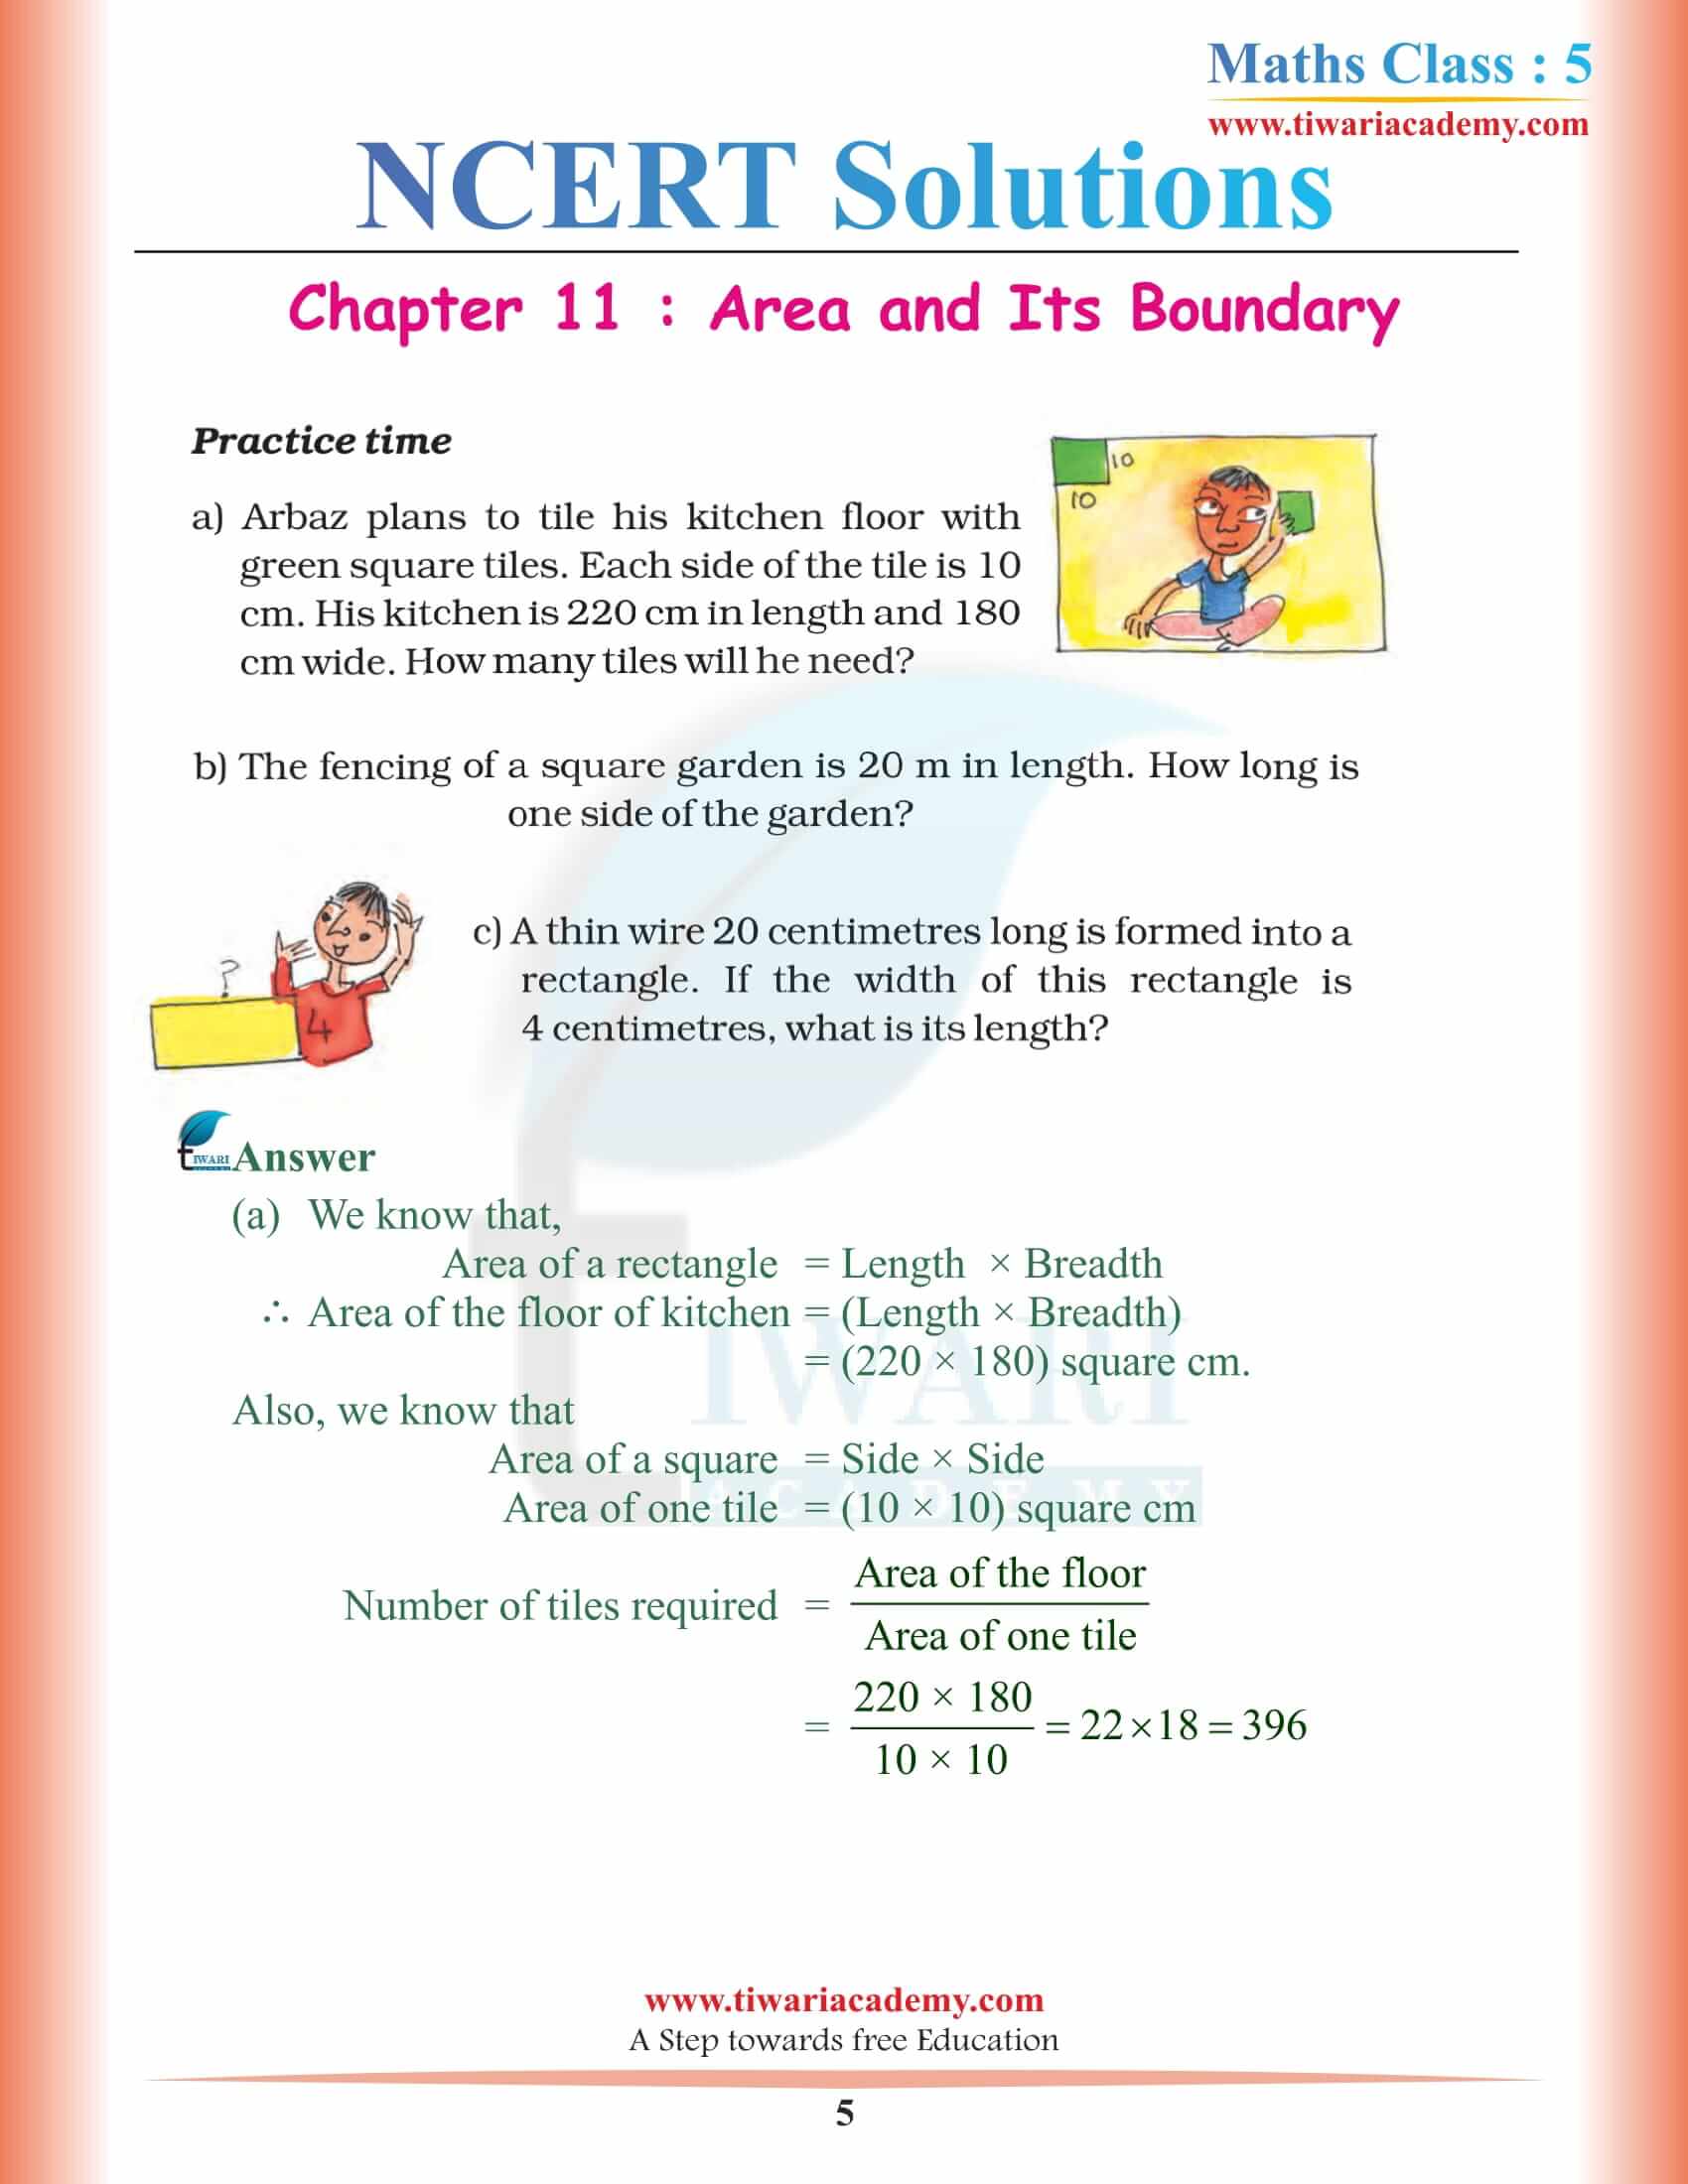 NCERT Solutions for Class 5 Maths Chapter 11 Free Download